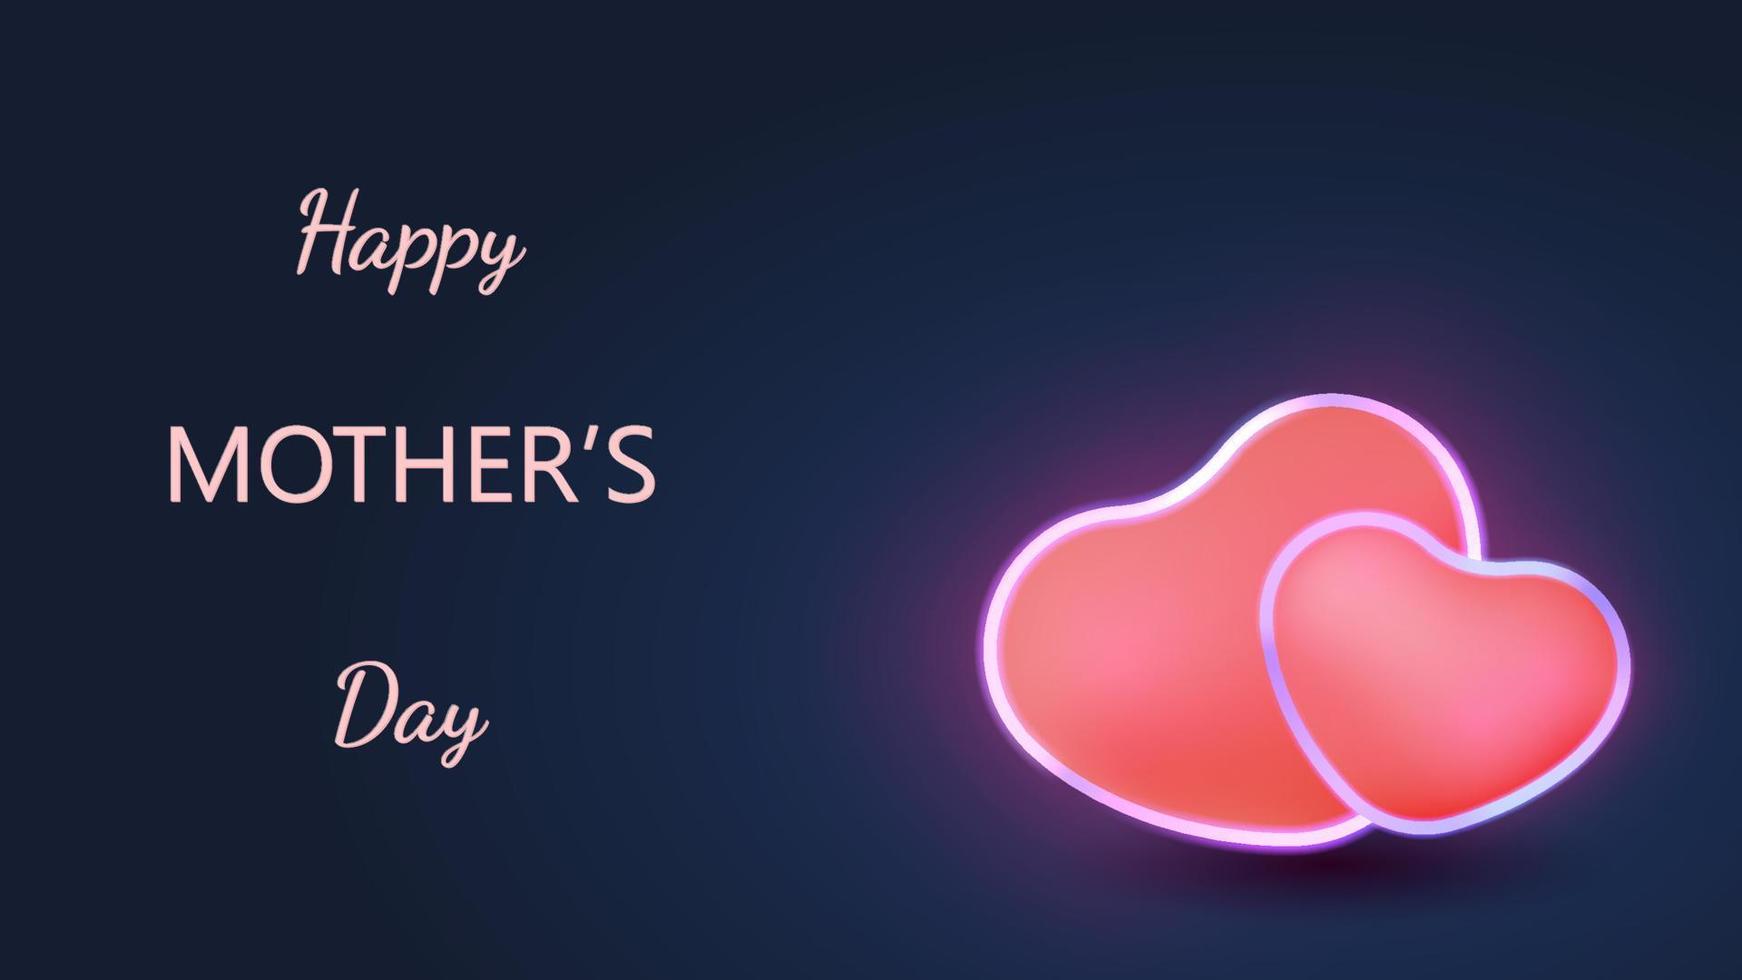 Happy Mother's Day vector illustration. mothers day vector illustration for greeting card, social  media posts.